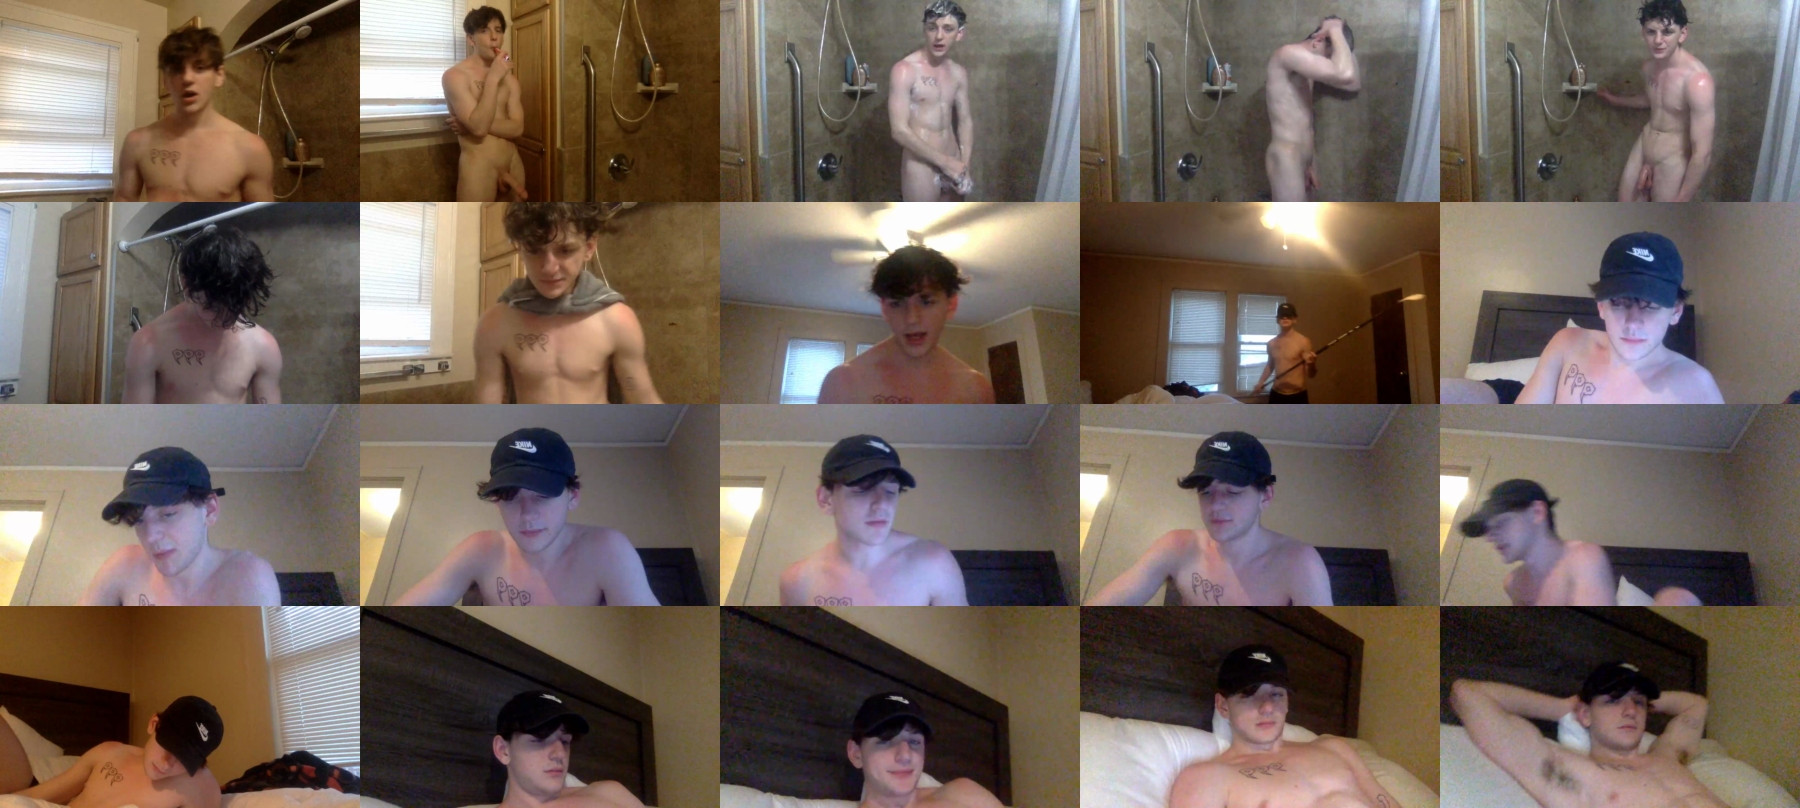 Sexylax69  17-05-2021 Male Topless